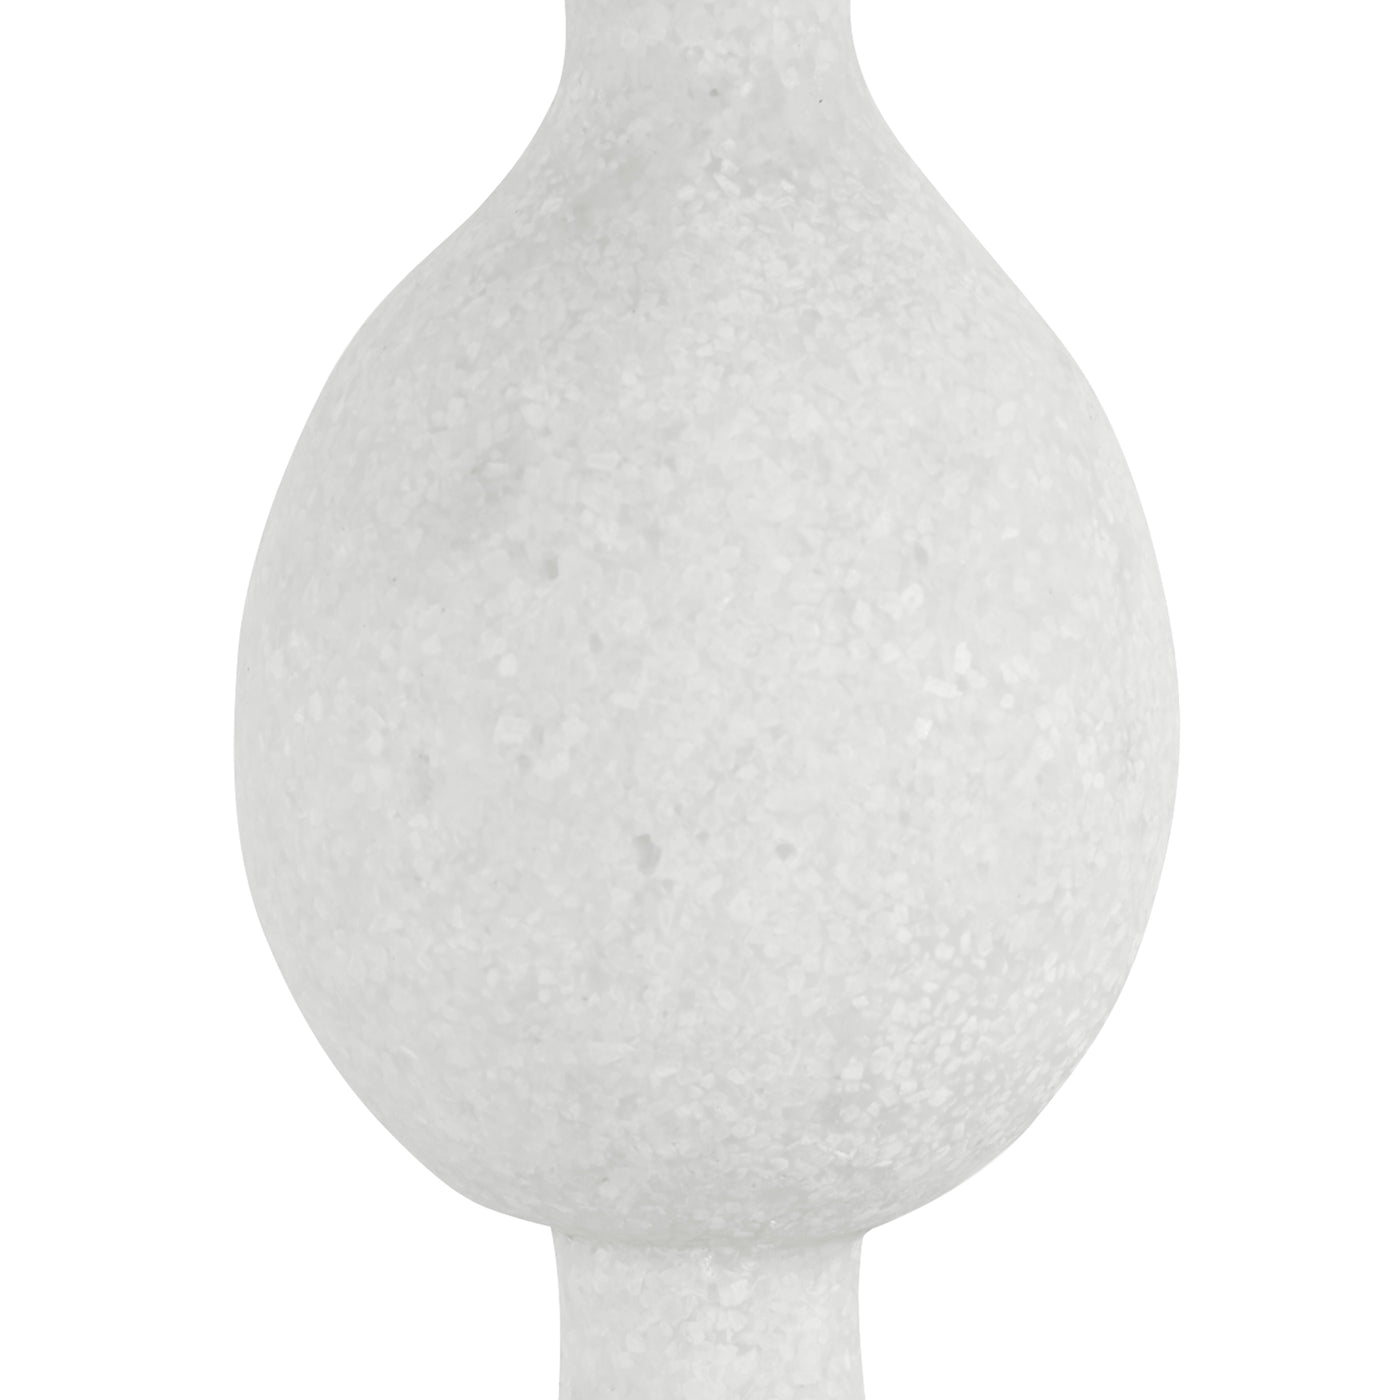 A Modern Black And White Table Lamp Executed In A Rich Material Made Of Granulated Marble That Accurately Replicates The L...